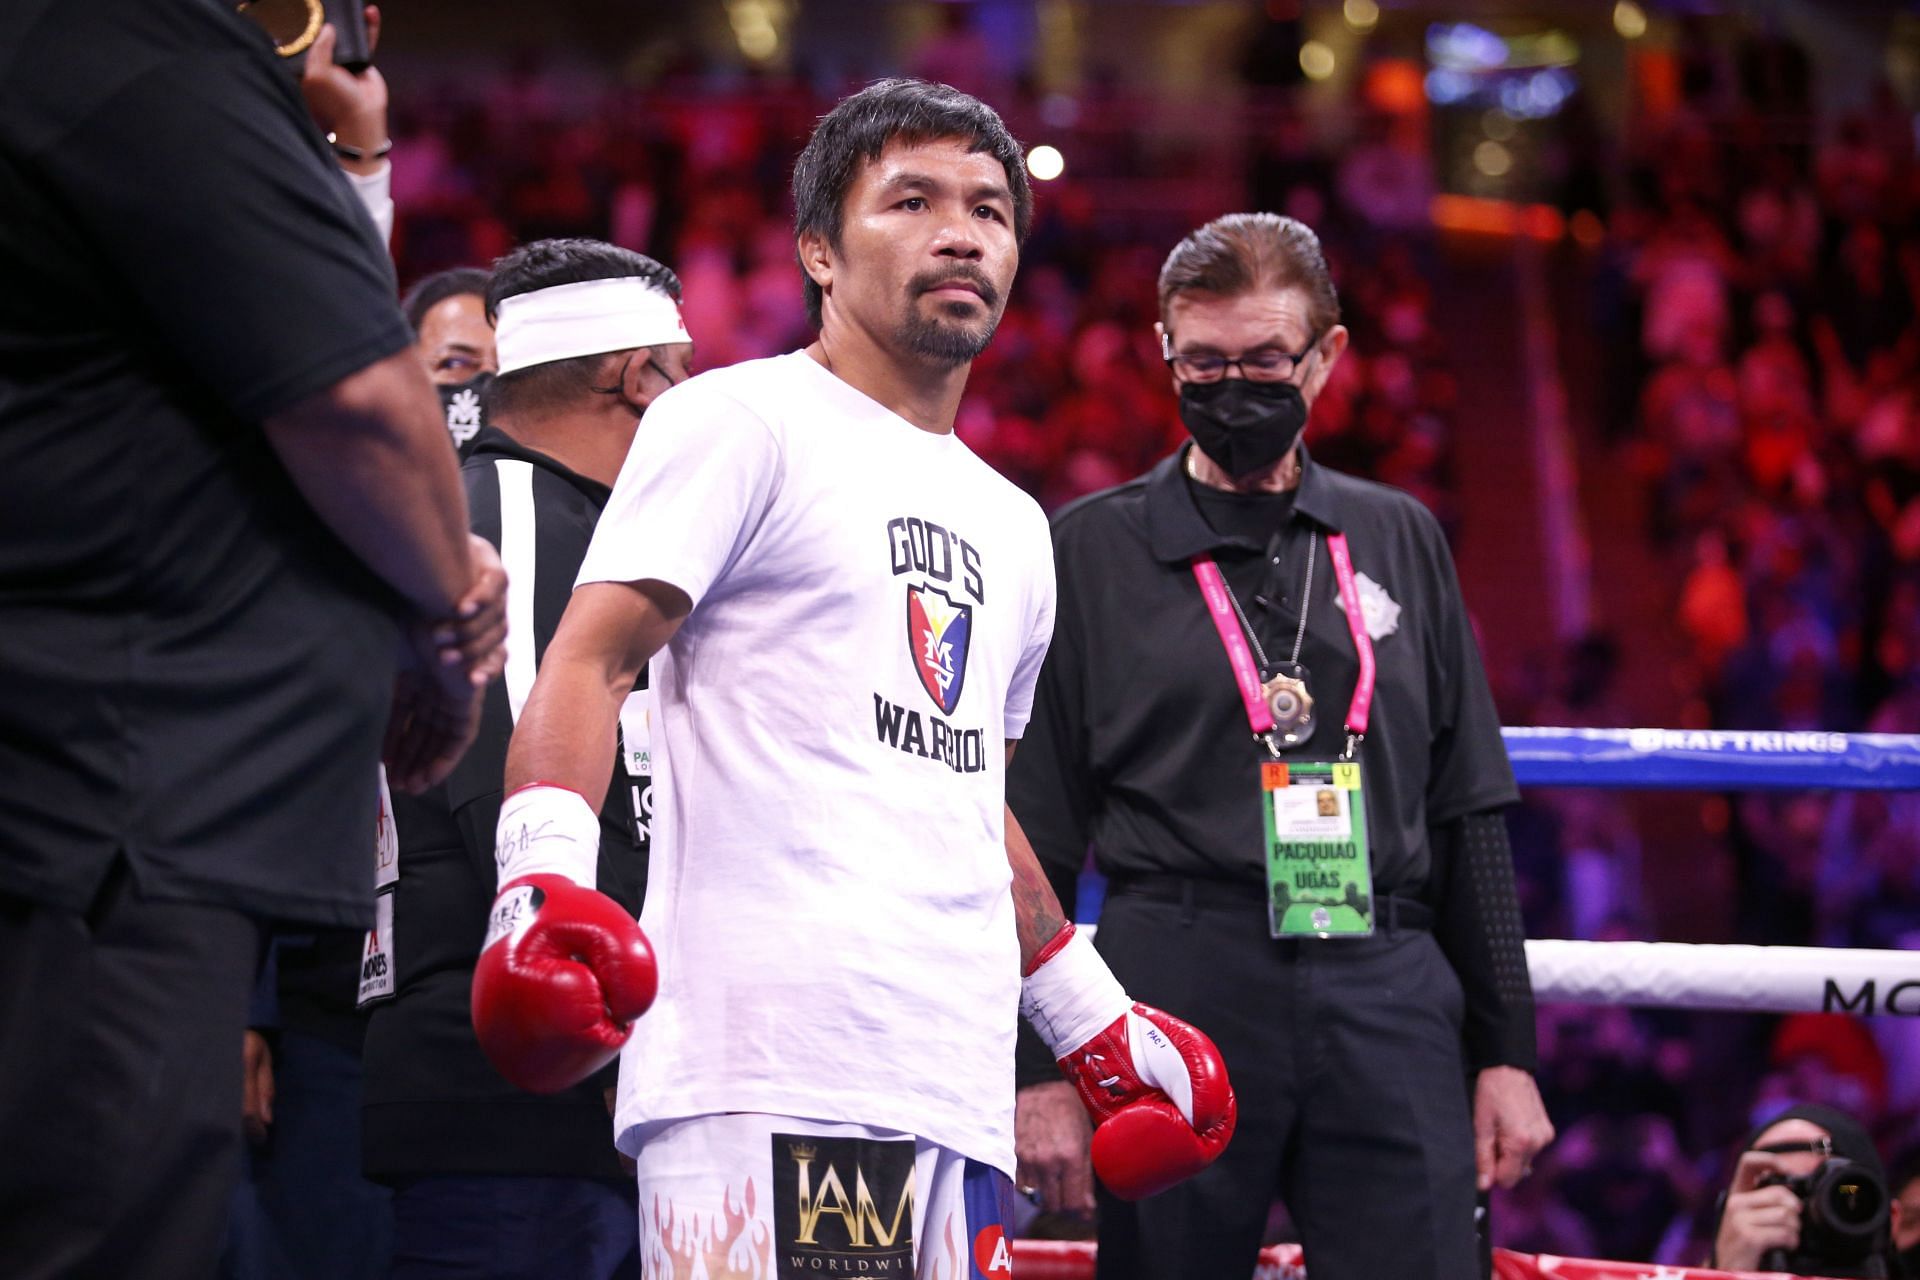 Manny Pacquiao is the latest boxer to jump into the NFT world.